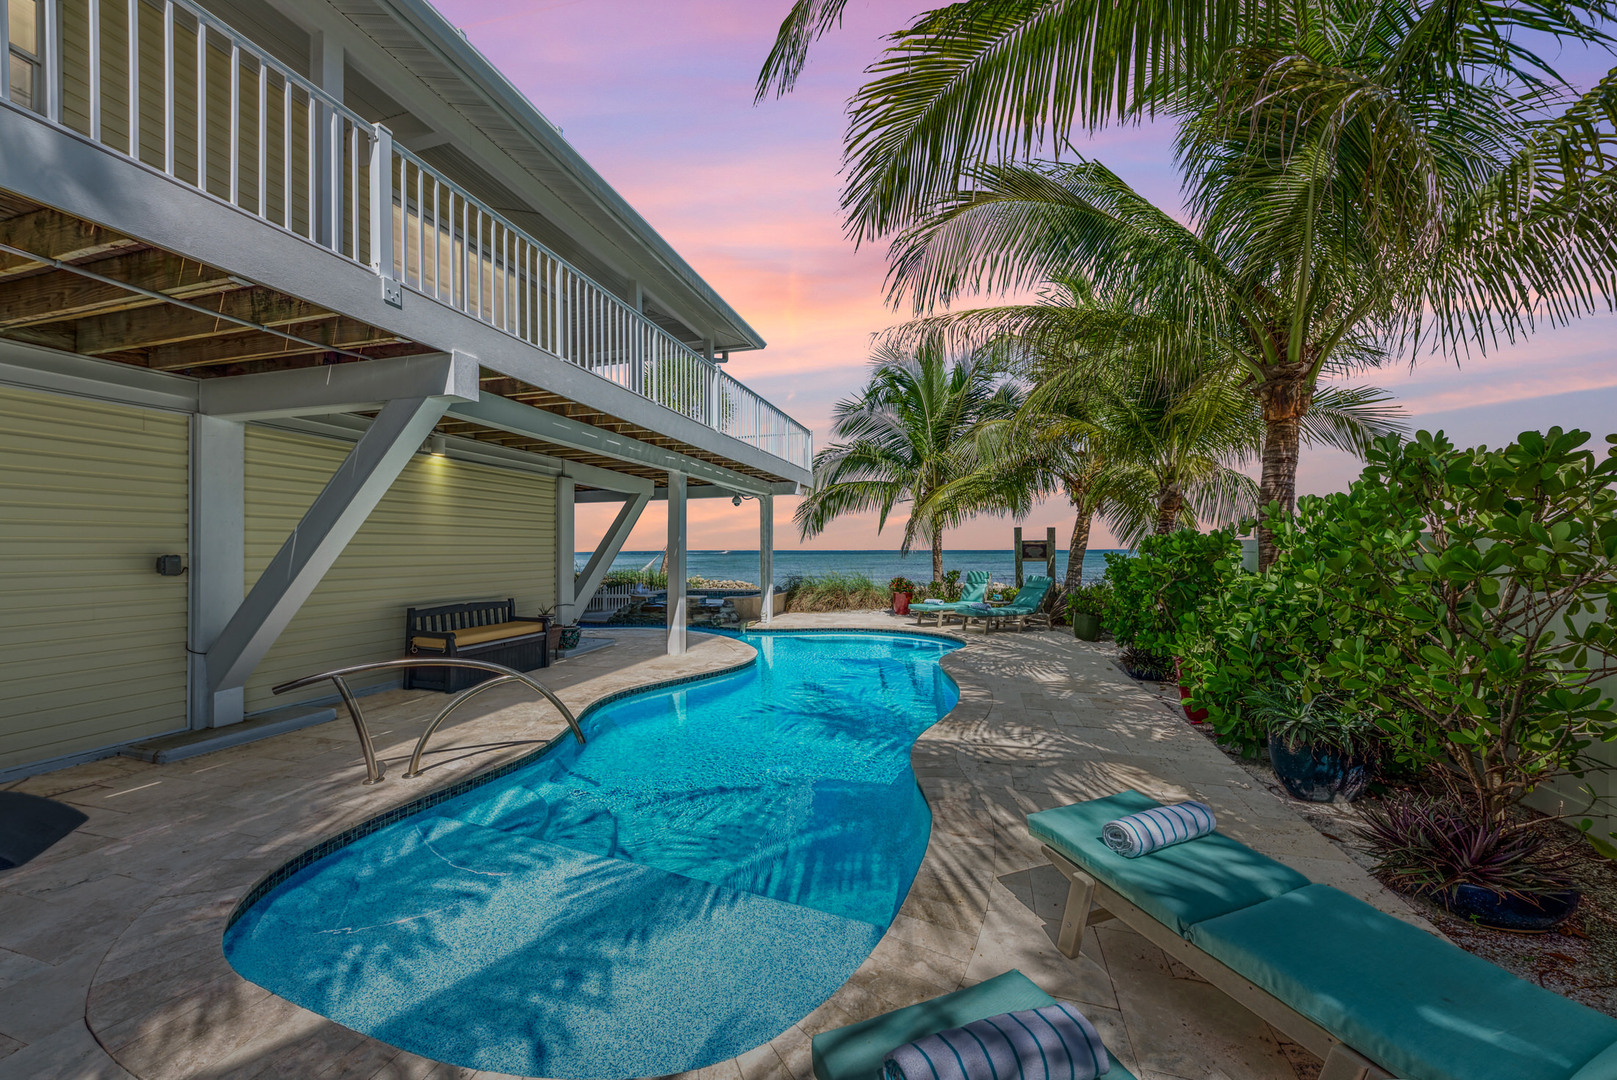 Pool overlooking the bay at sunset at Dolphin Tales by Anna Maria Life Vacation Rentals